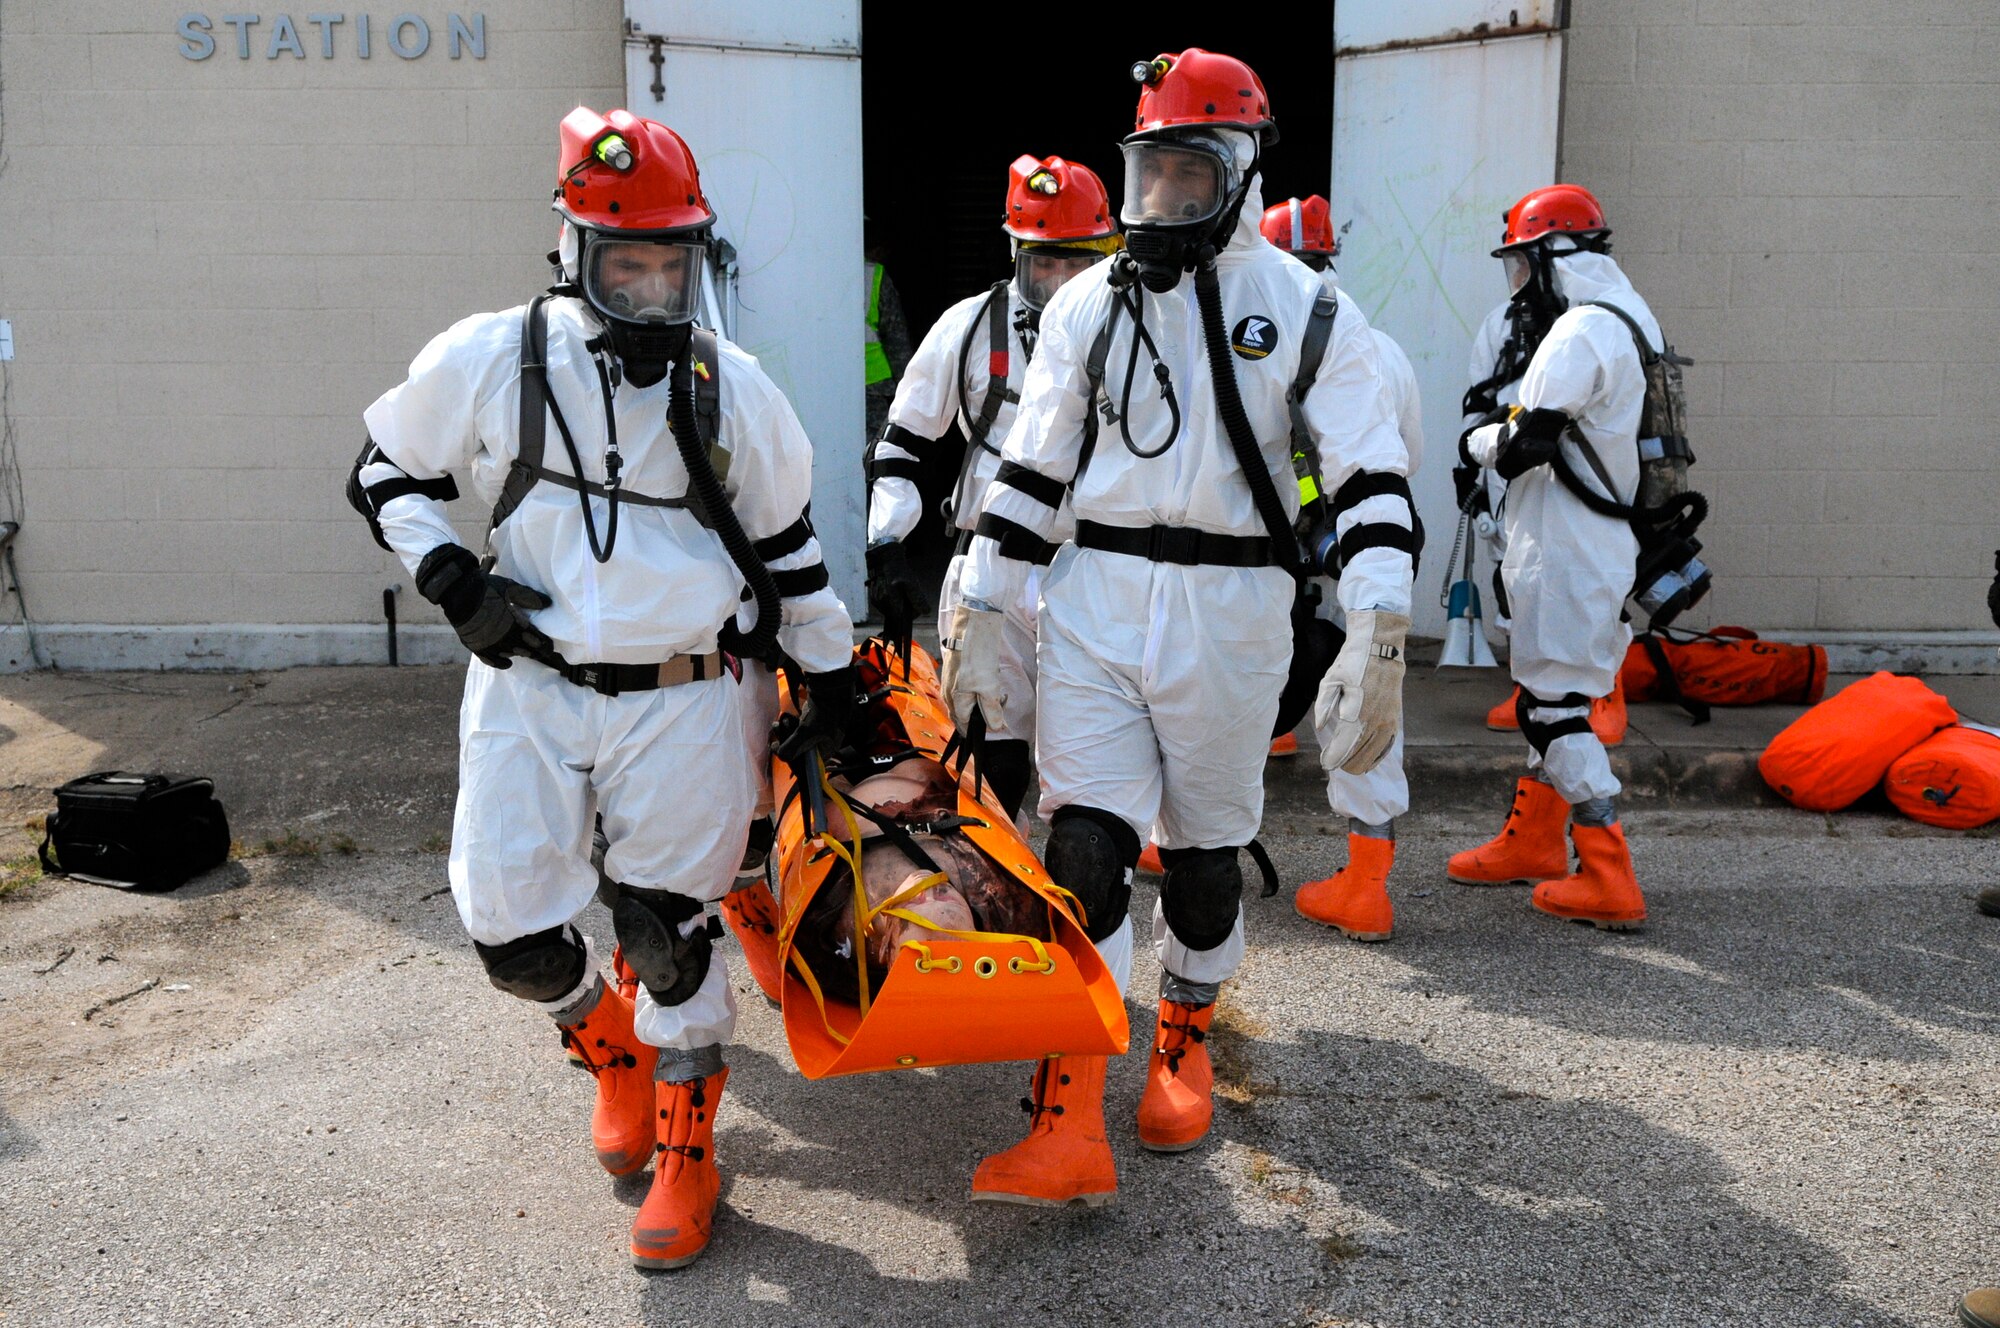 Members of the 6 CBRNE Emergency Response Force Package (CERF-P), a subcomponent of Joint Task Force-71, simulate removing victims of a chemical attack during an emergency preparedness exercise in Austin, Texas, on Apr. 26, 2012. (Air National Guard photo by Senior Master Sgt. Mike Arellano / Released)